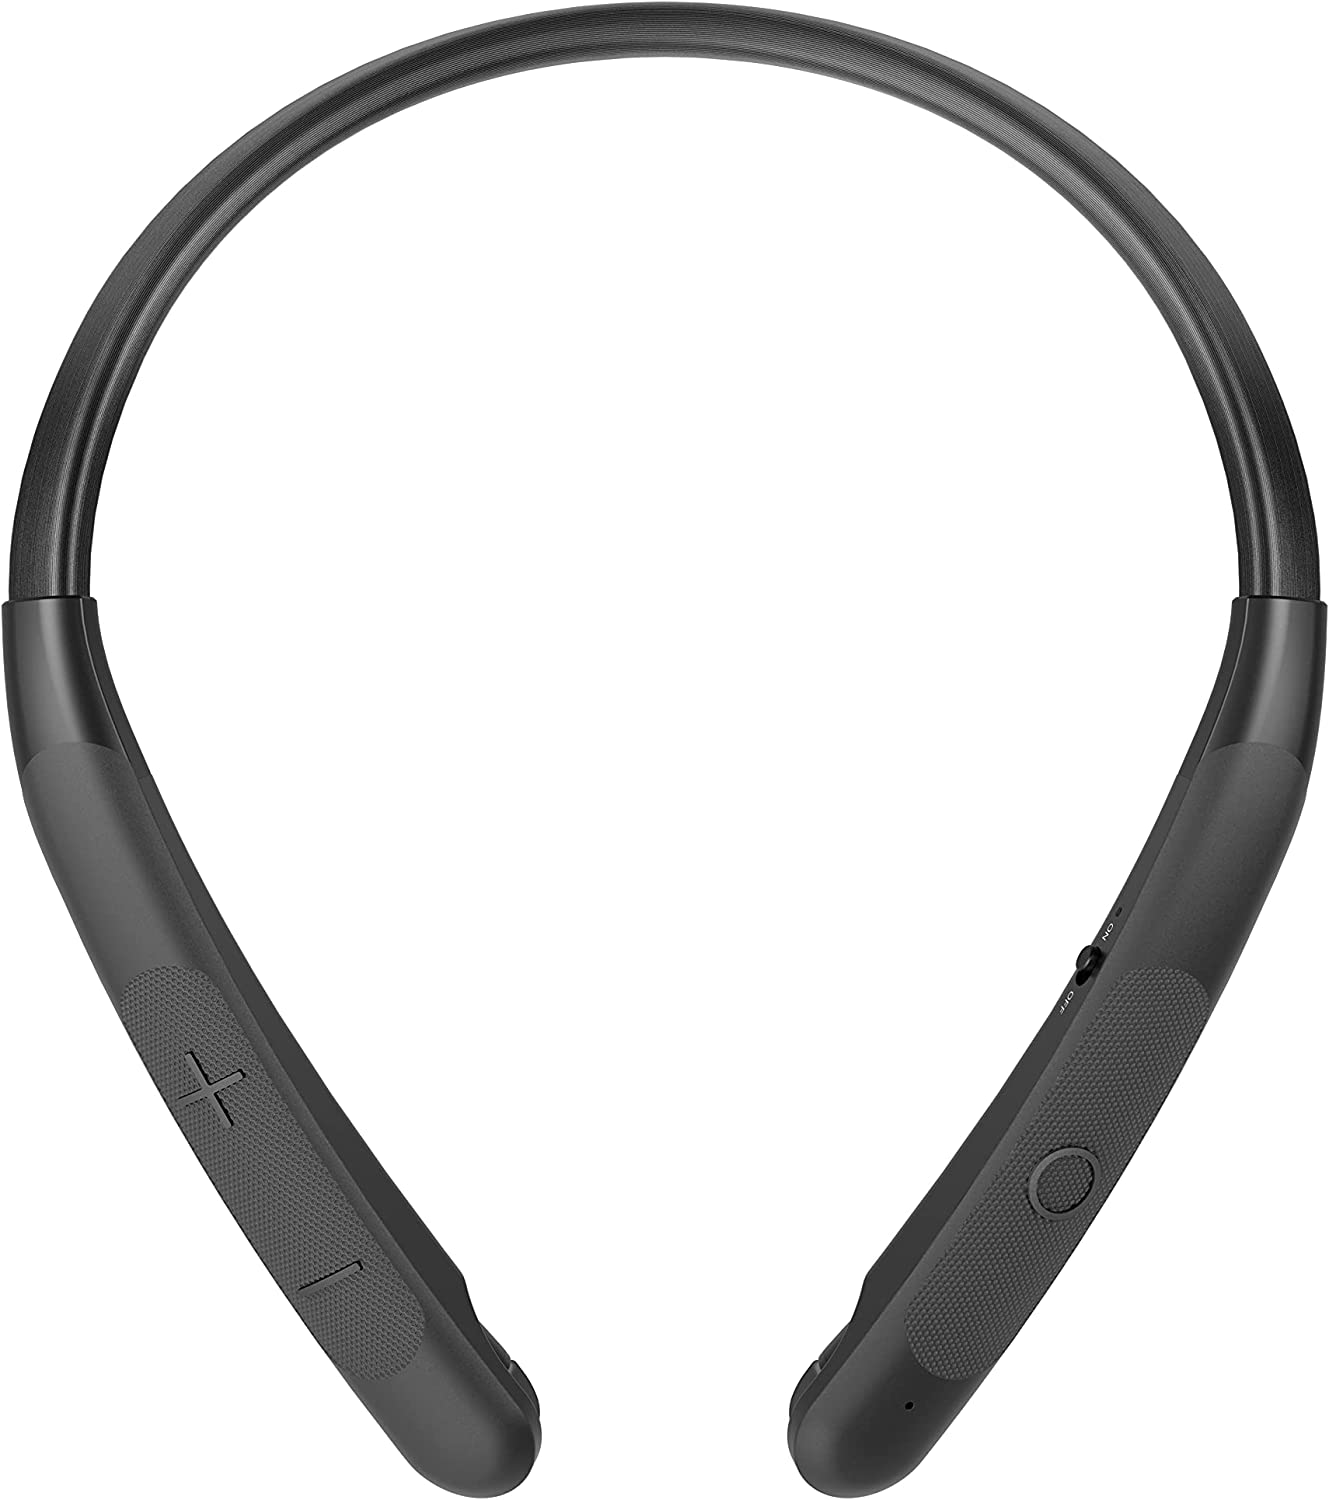 LG TONE NP3 Wireless Stereo Headset with Retractable Earbuds - Black (Pre-Owned)